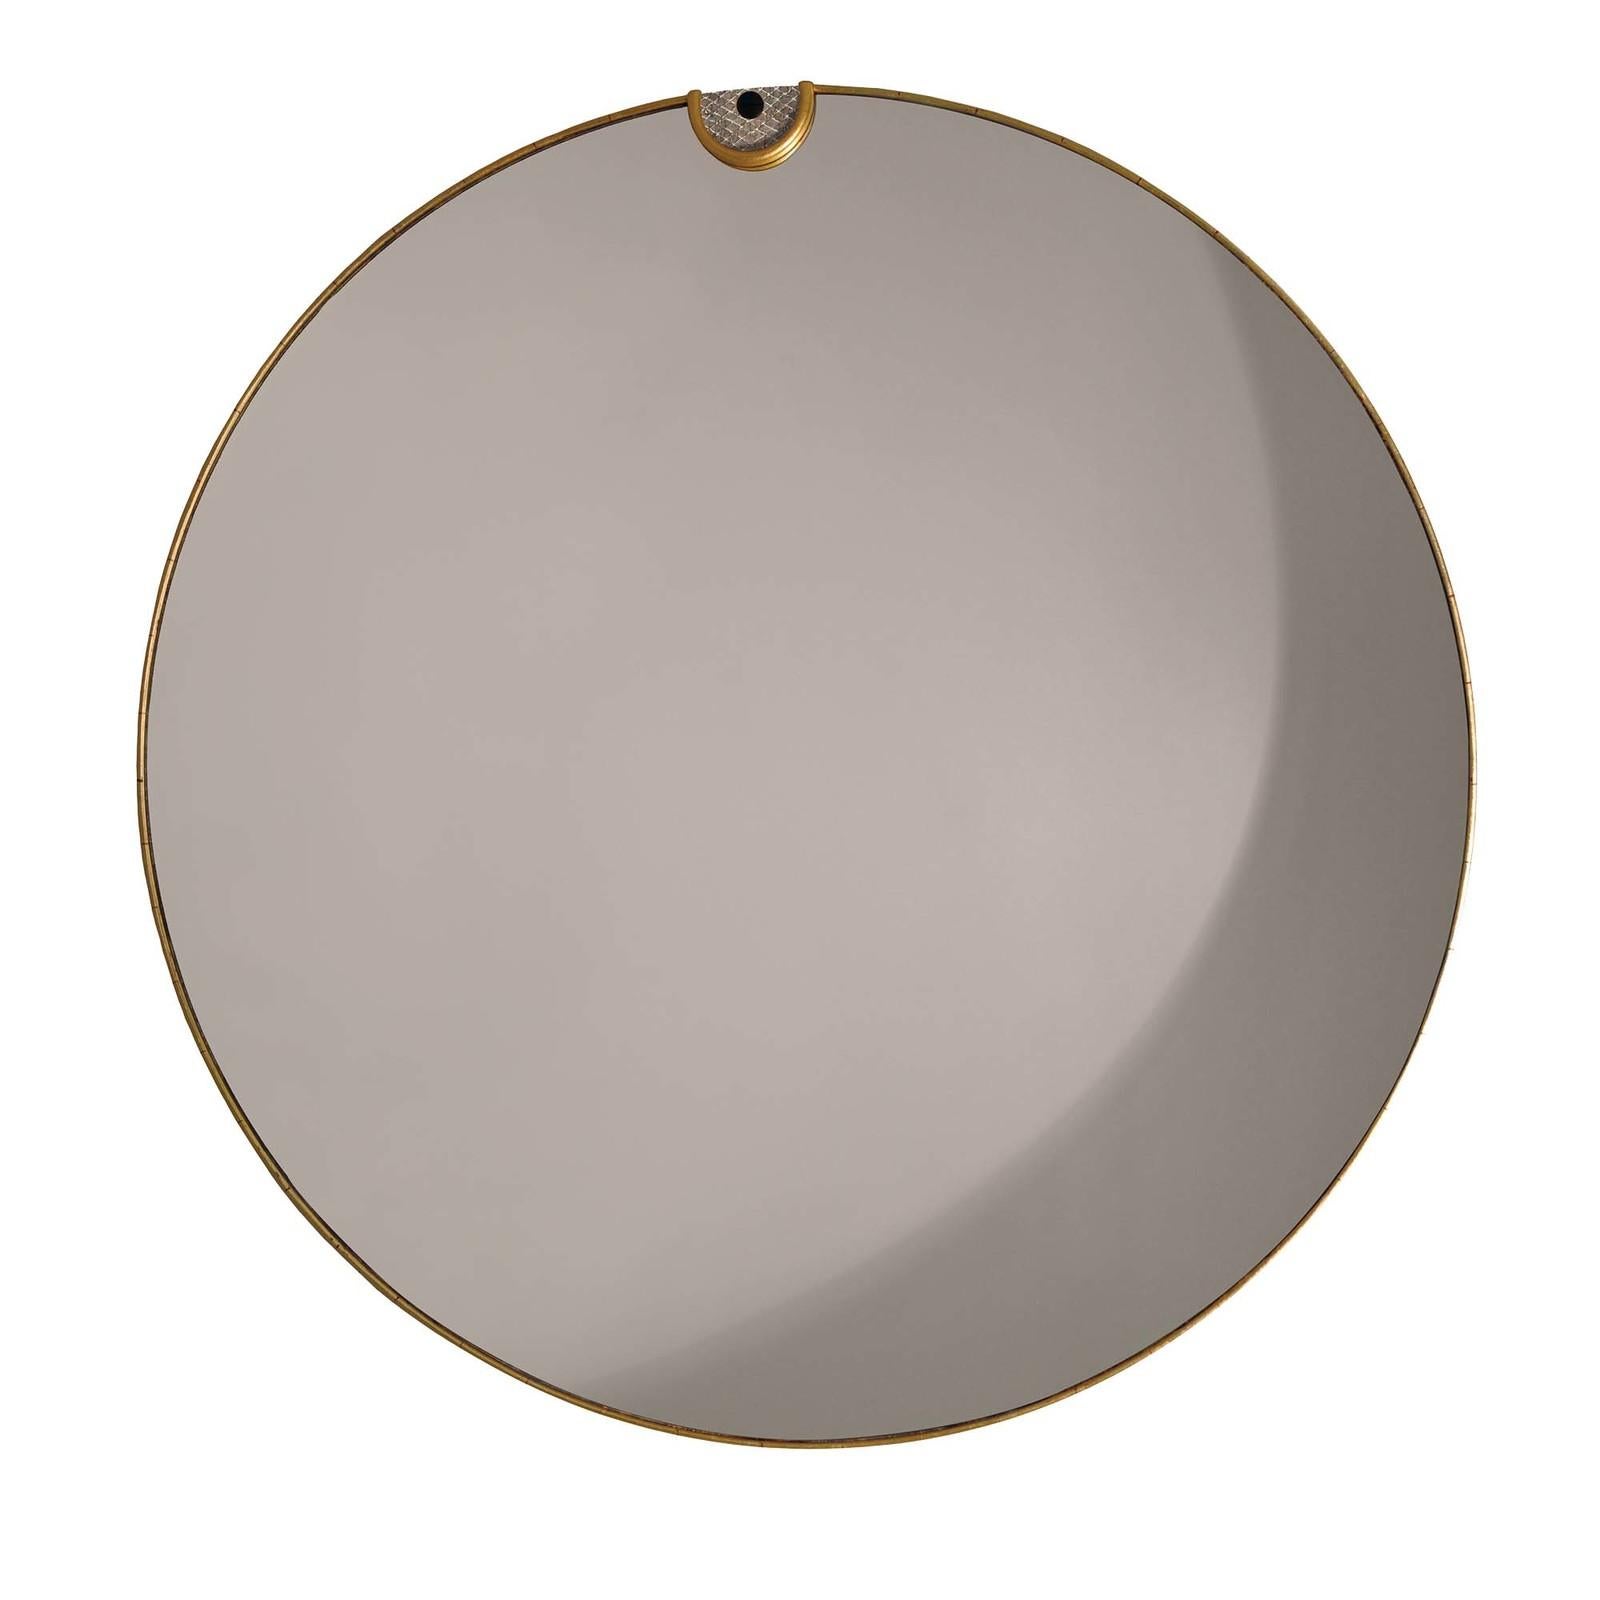 Elegant and sophisticated, this round wall mirror features a minimal oak frame adorned with gold leaf and embellished on top with a semicircular detail in stained cork with a pattern evoking fish scales. Taking center stage on a bare wall in an